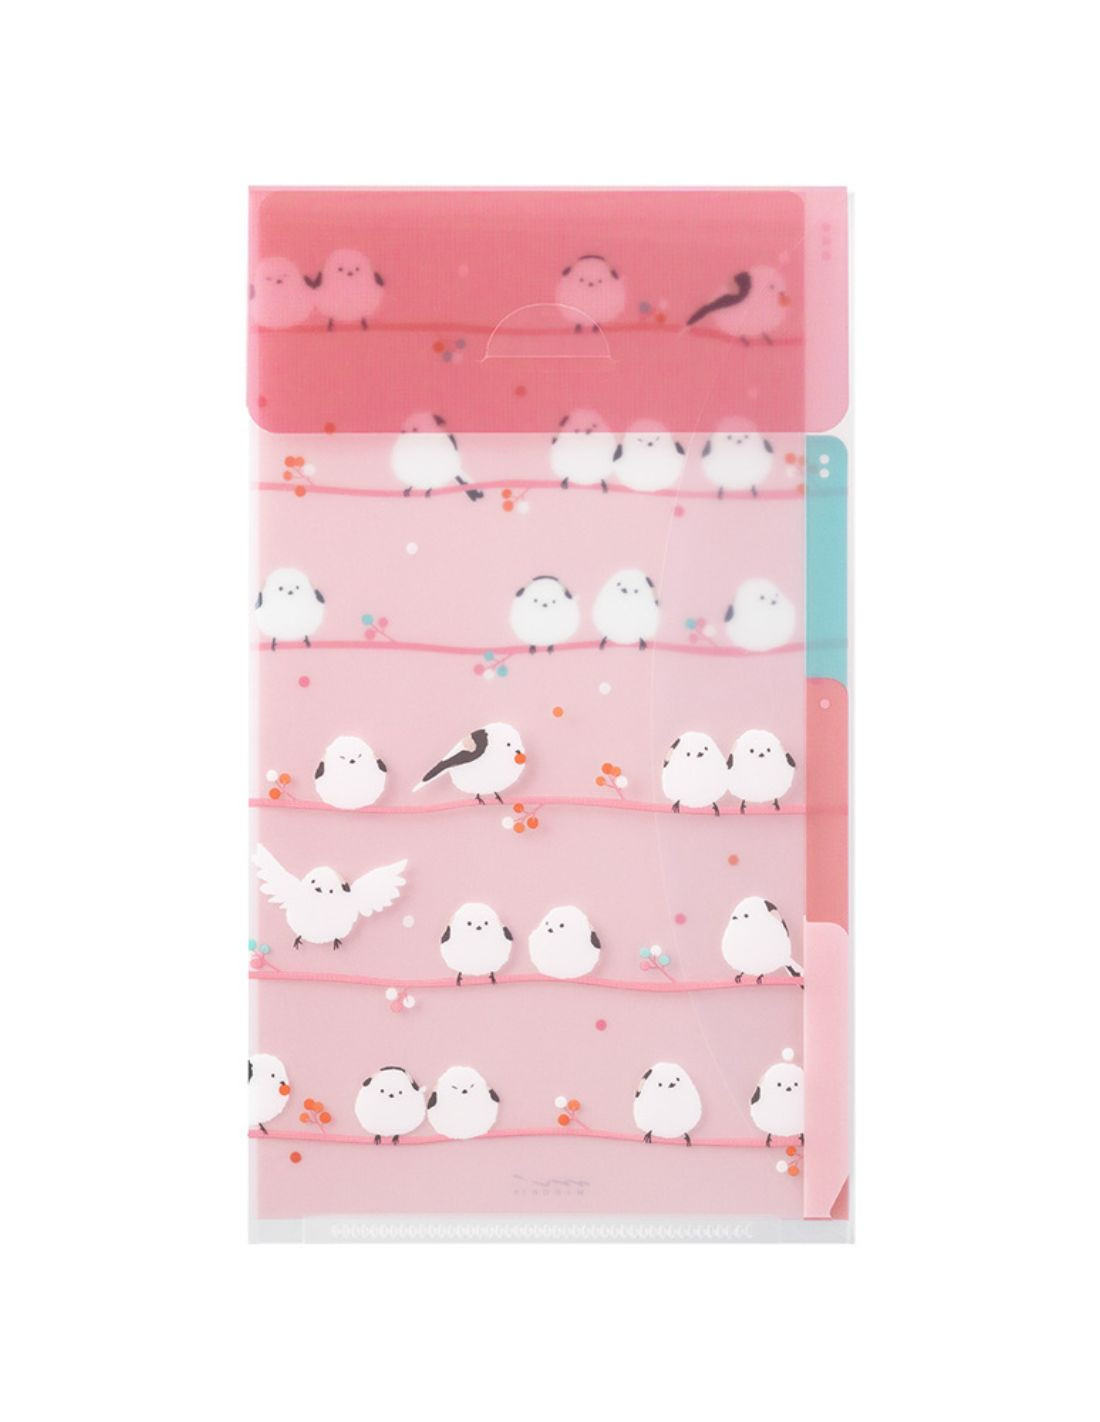 Midori 3 Pockets Clear Folder A5 Slim with Flap - Long-tailed Tits